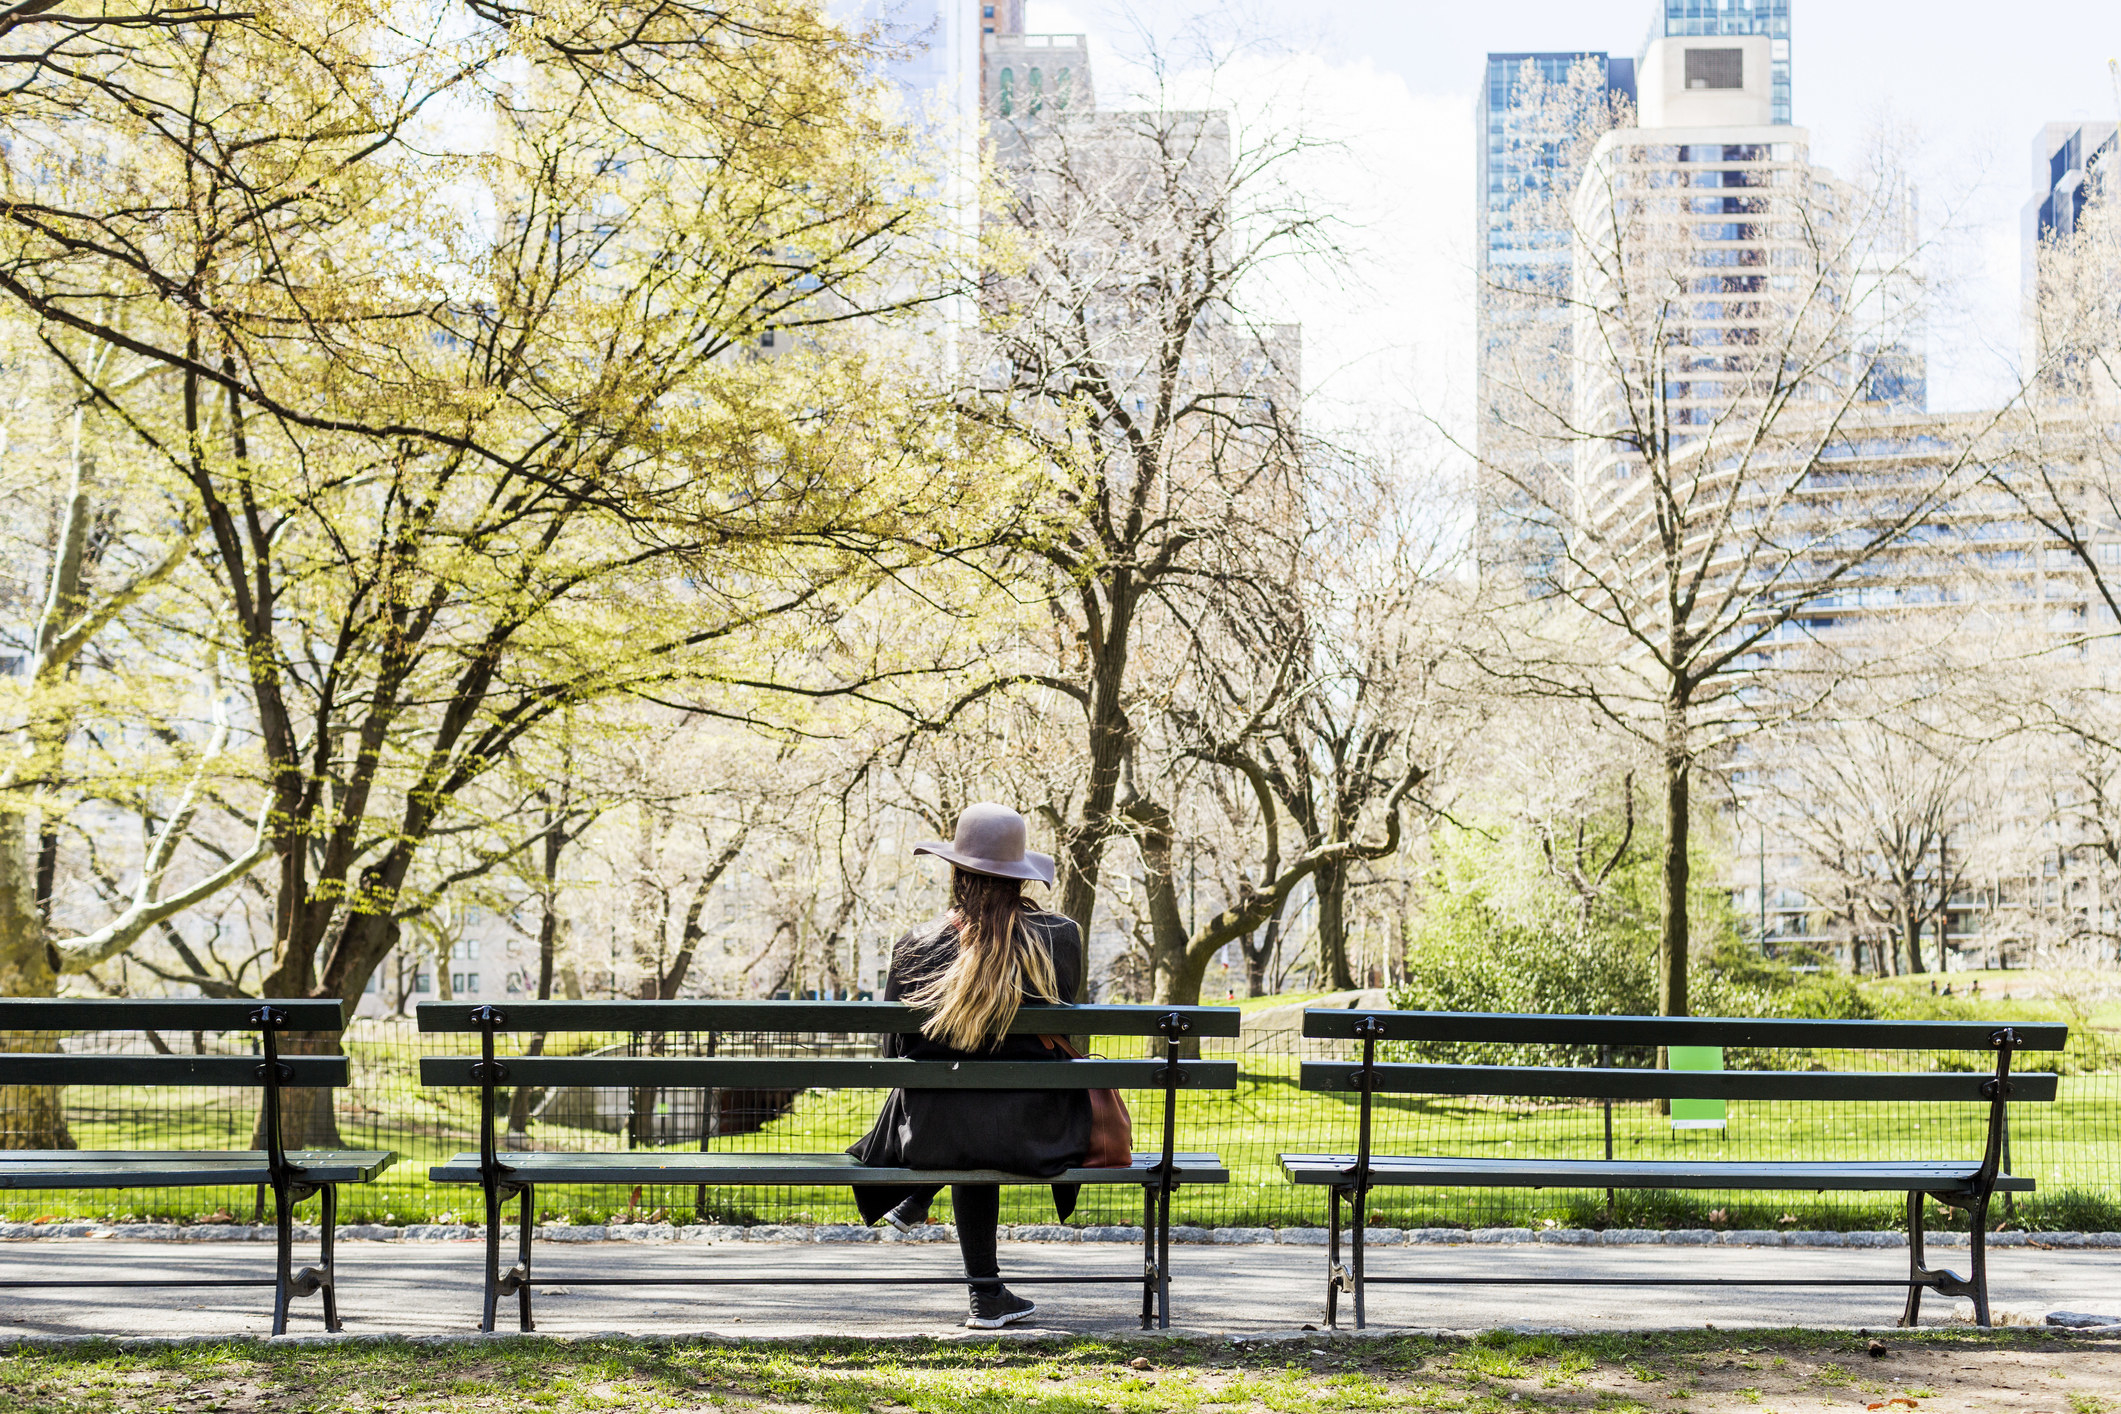 A woman sitting on a bench in Central Park